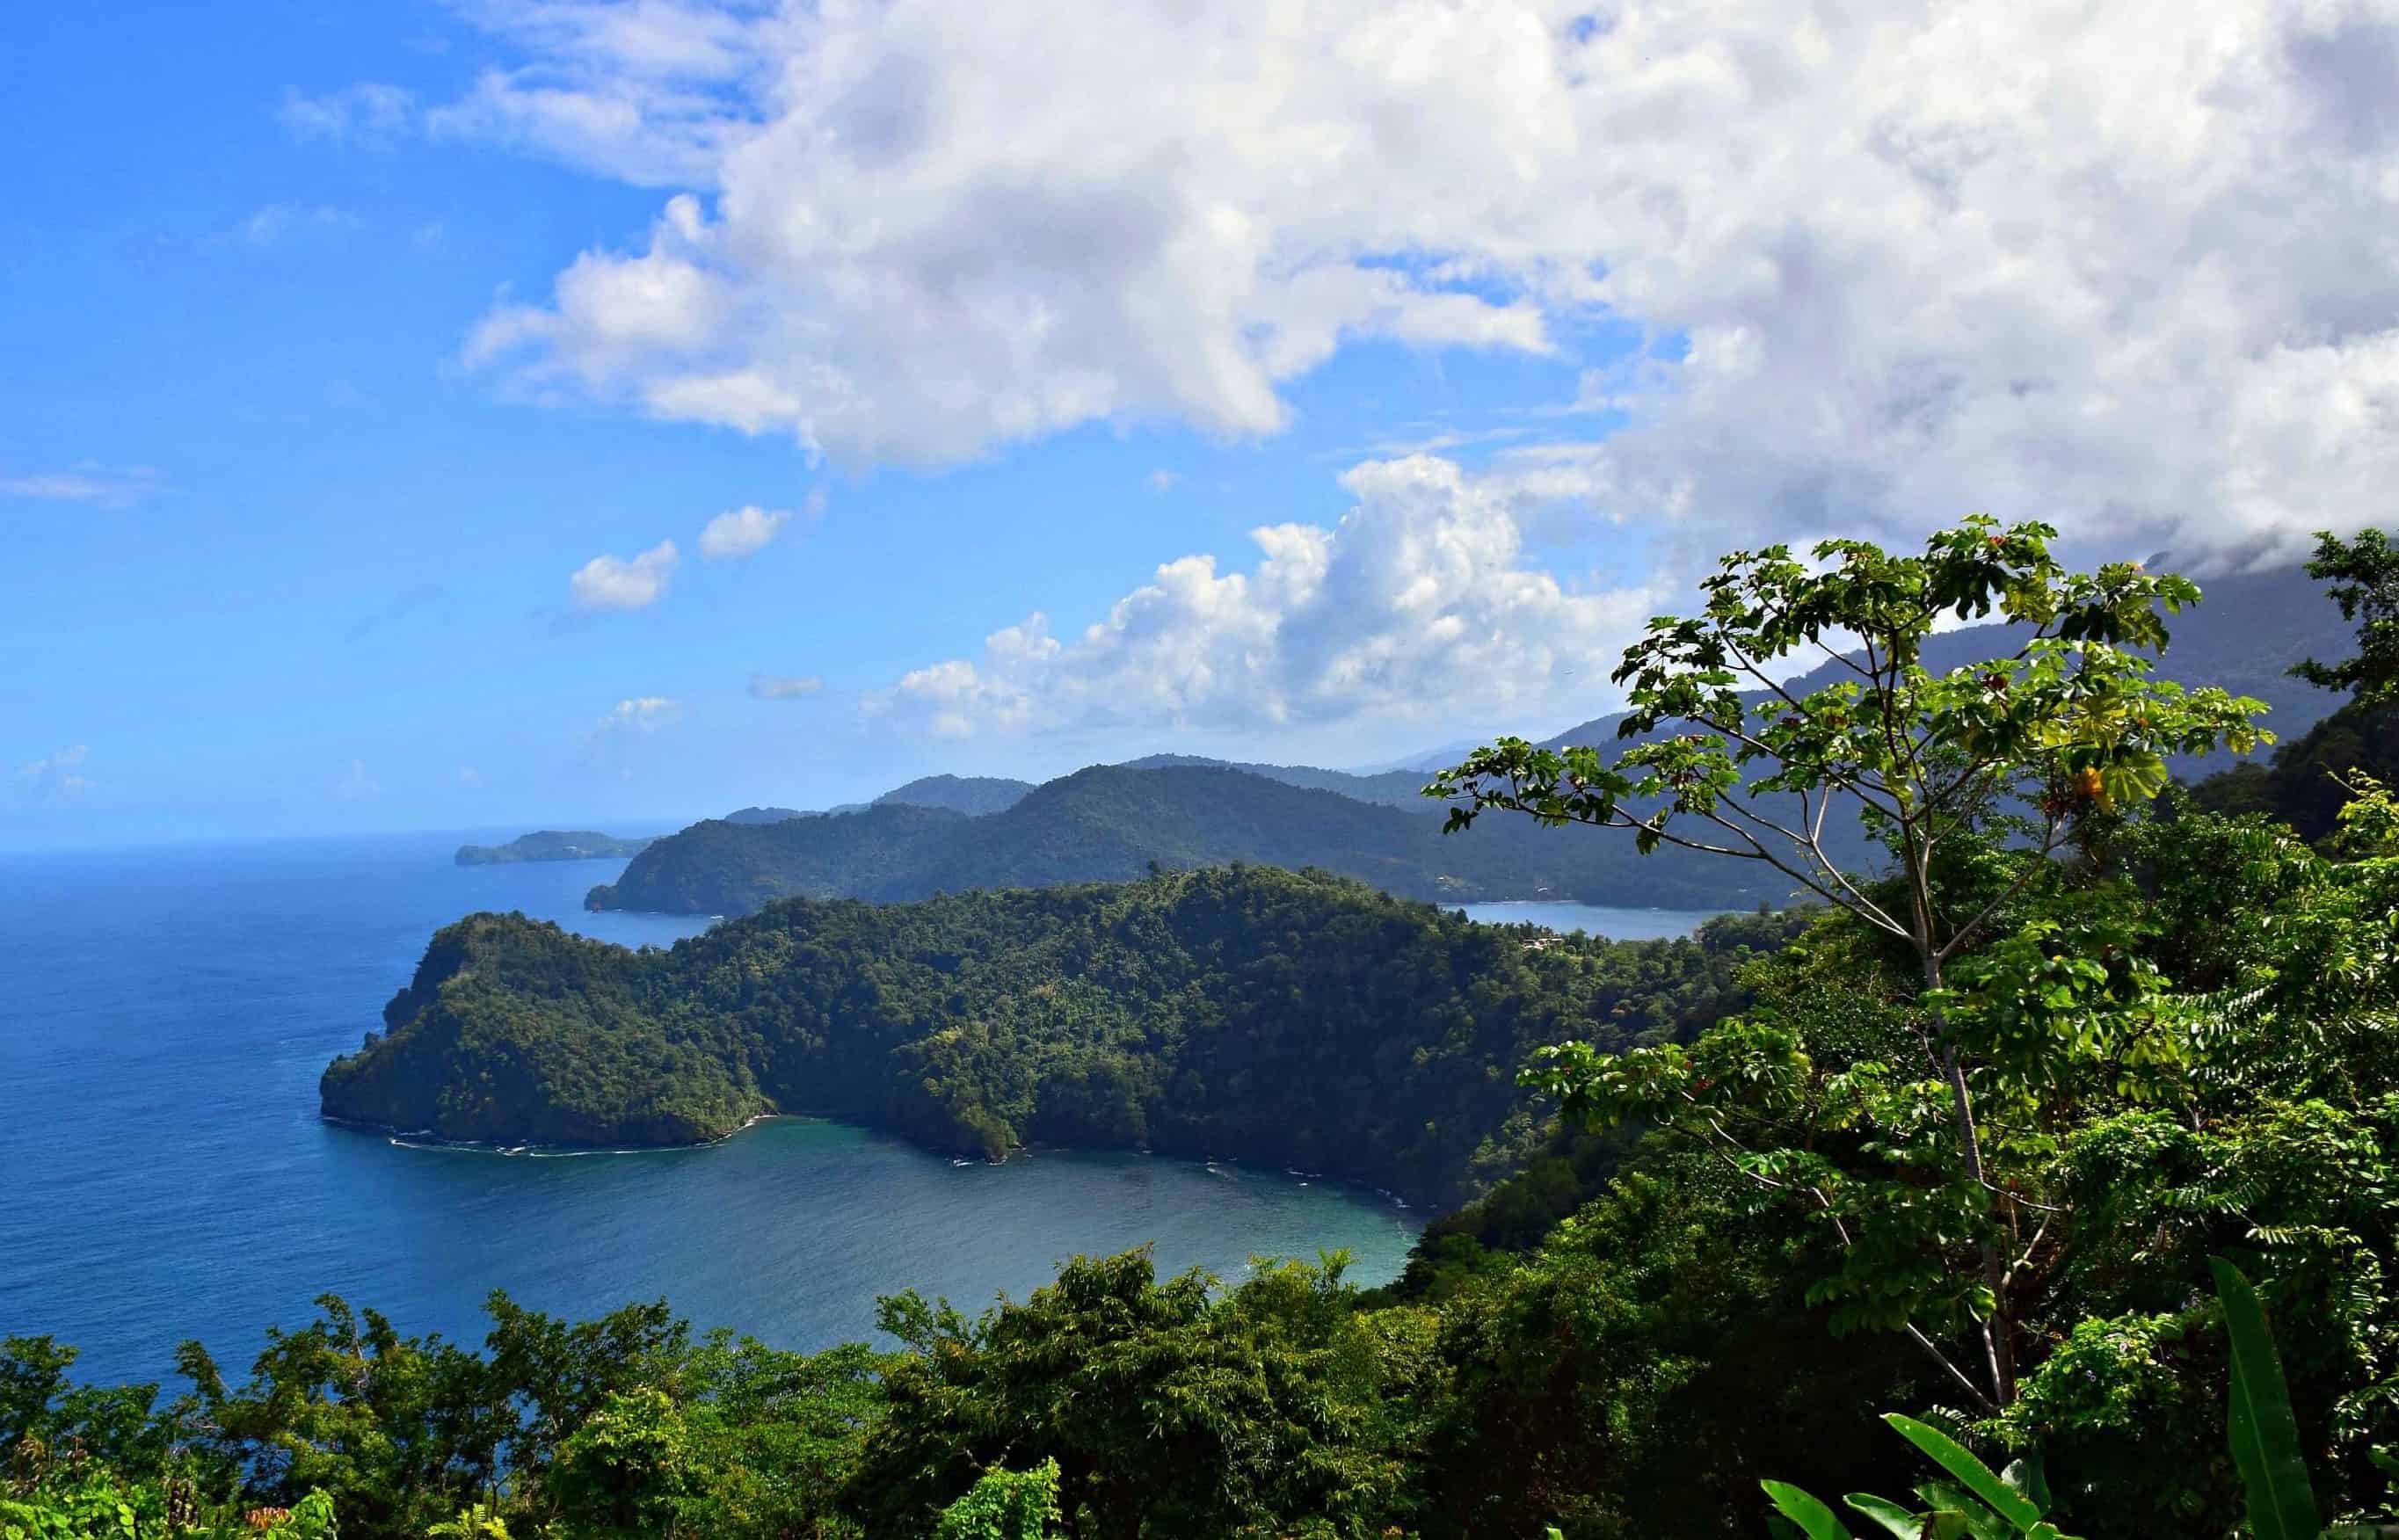 8 PHOTOS THAT WILL MAKE YOU WANT TO TOUR TRINIDAD'S NORTH COAST - Travel Bliss Now2729 x 1752